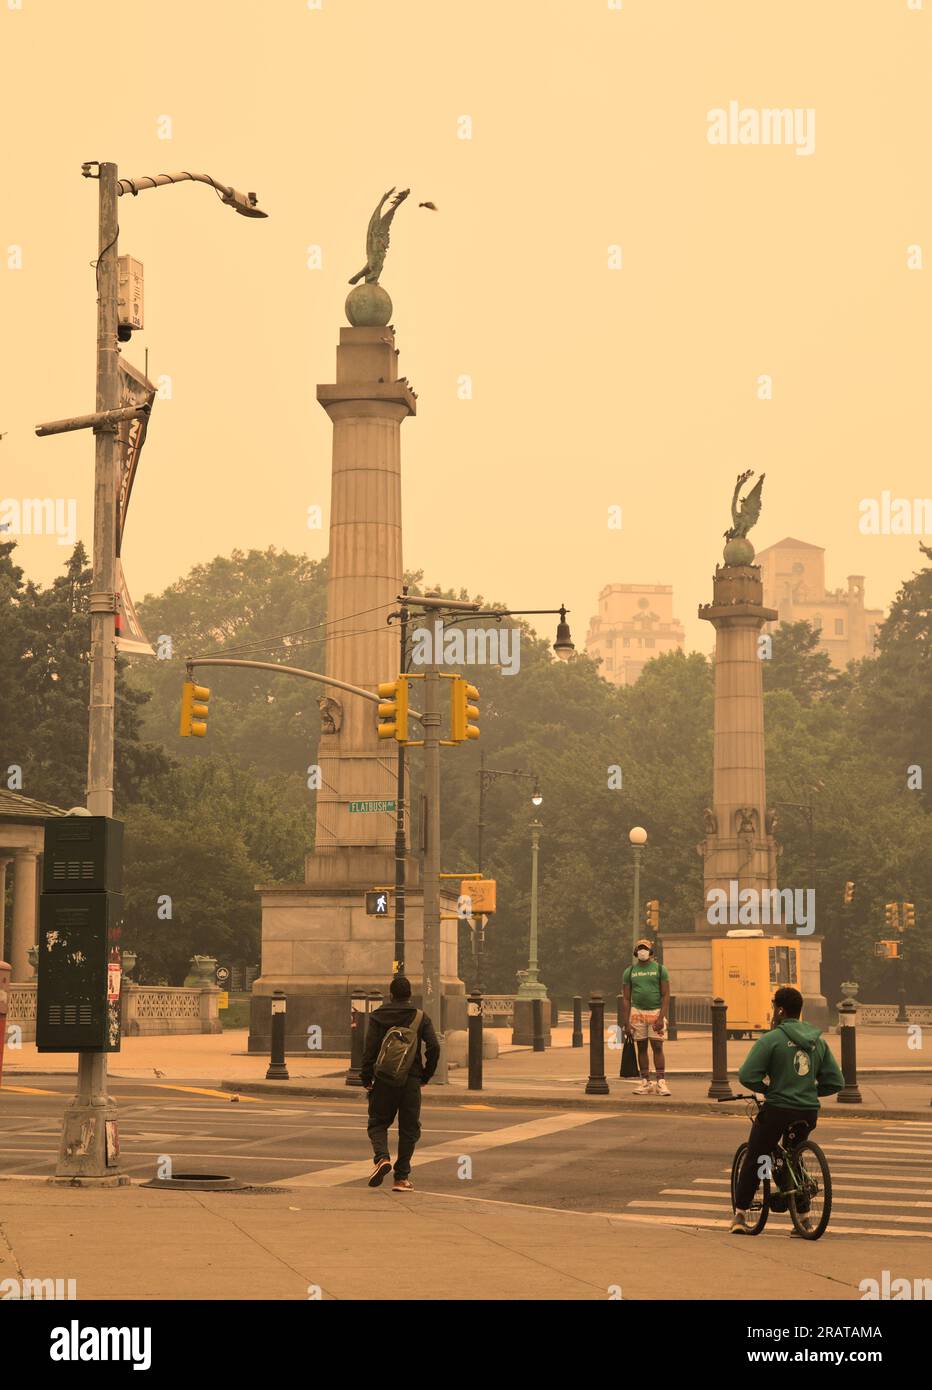 Brooklyn, NY - June 7 2023: People pass by Grand Army Plaza during haze and smoke conditions caused by wildfires in Canada.  Many people are wearing m Stock Photo